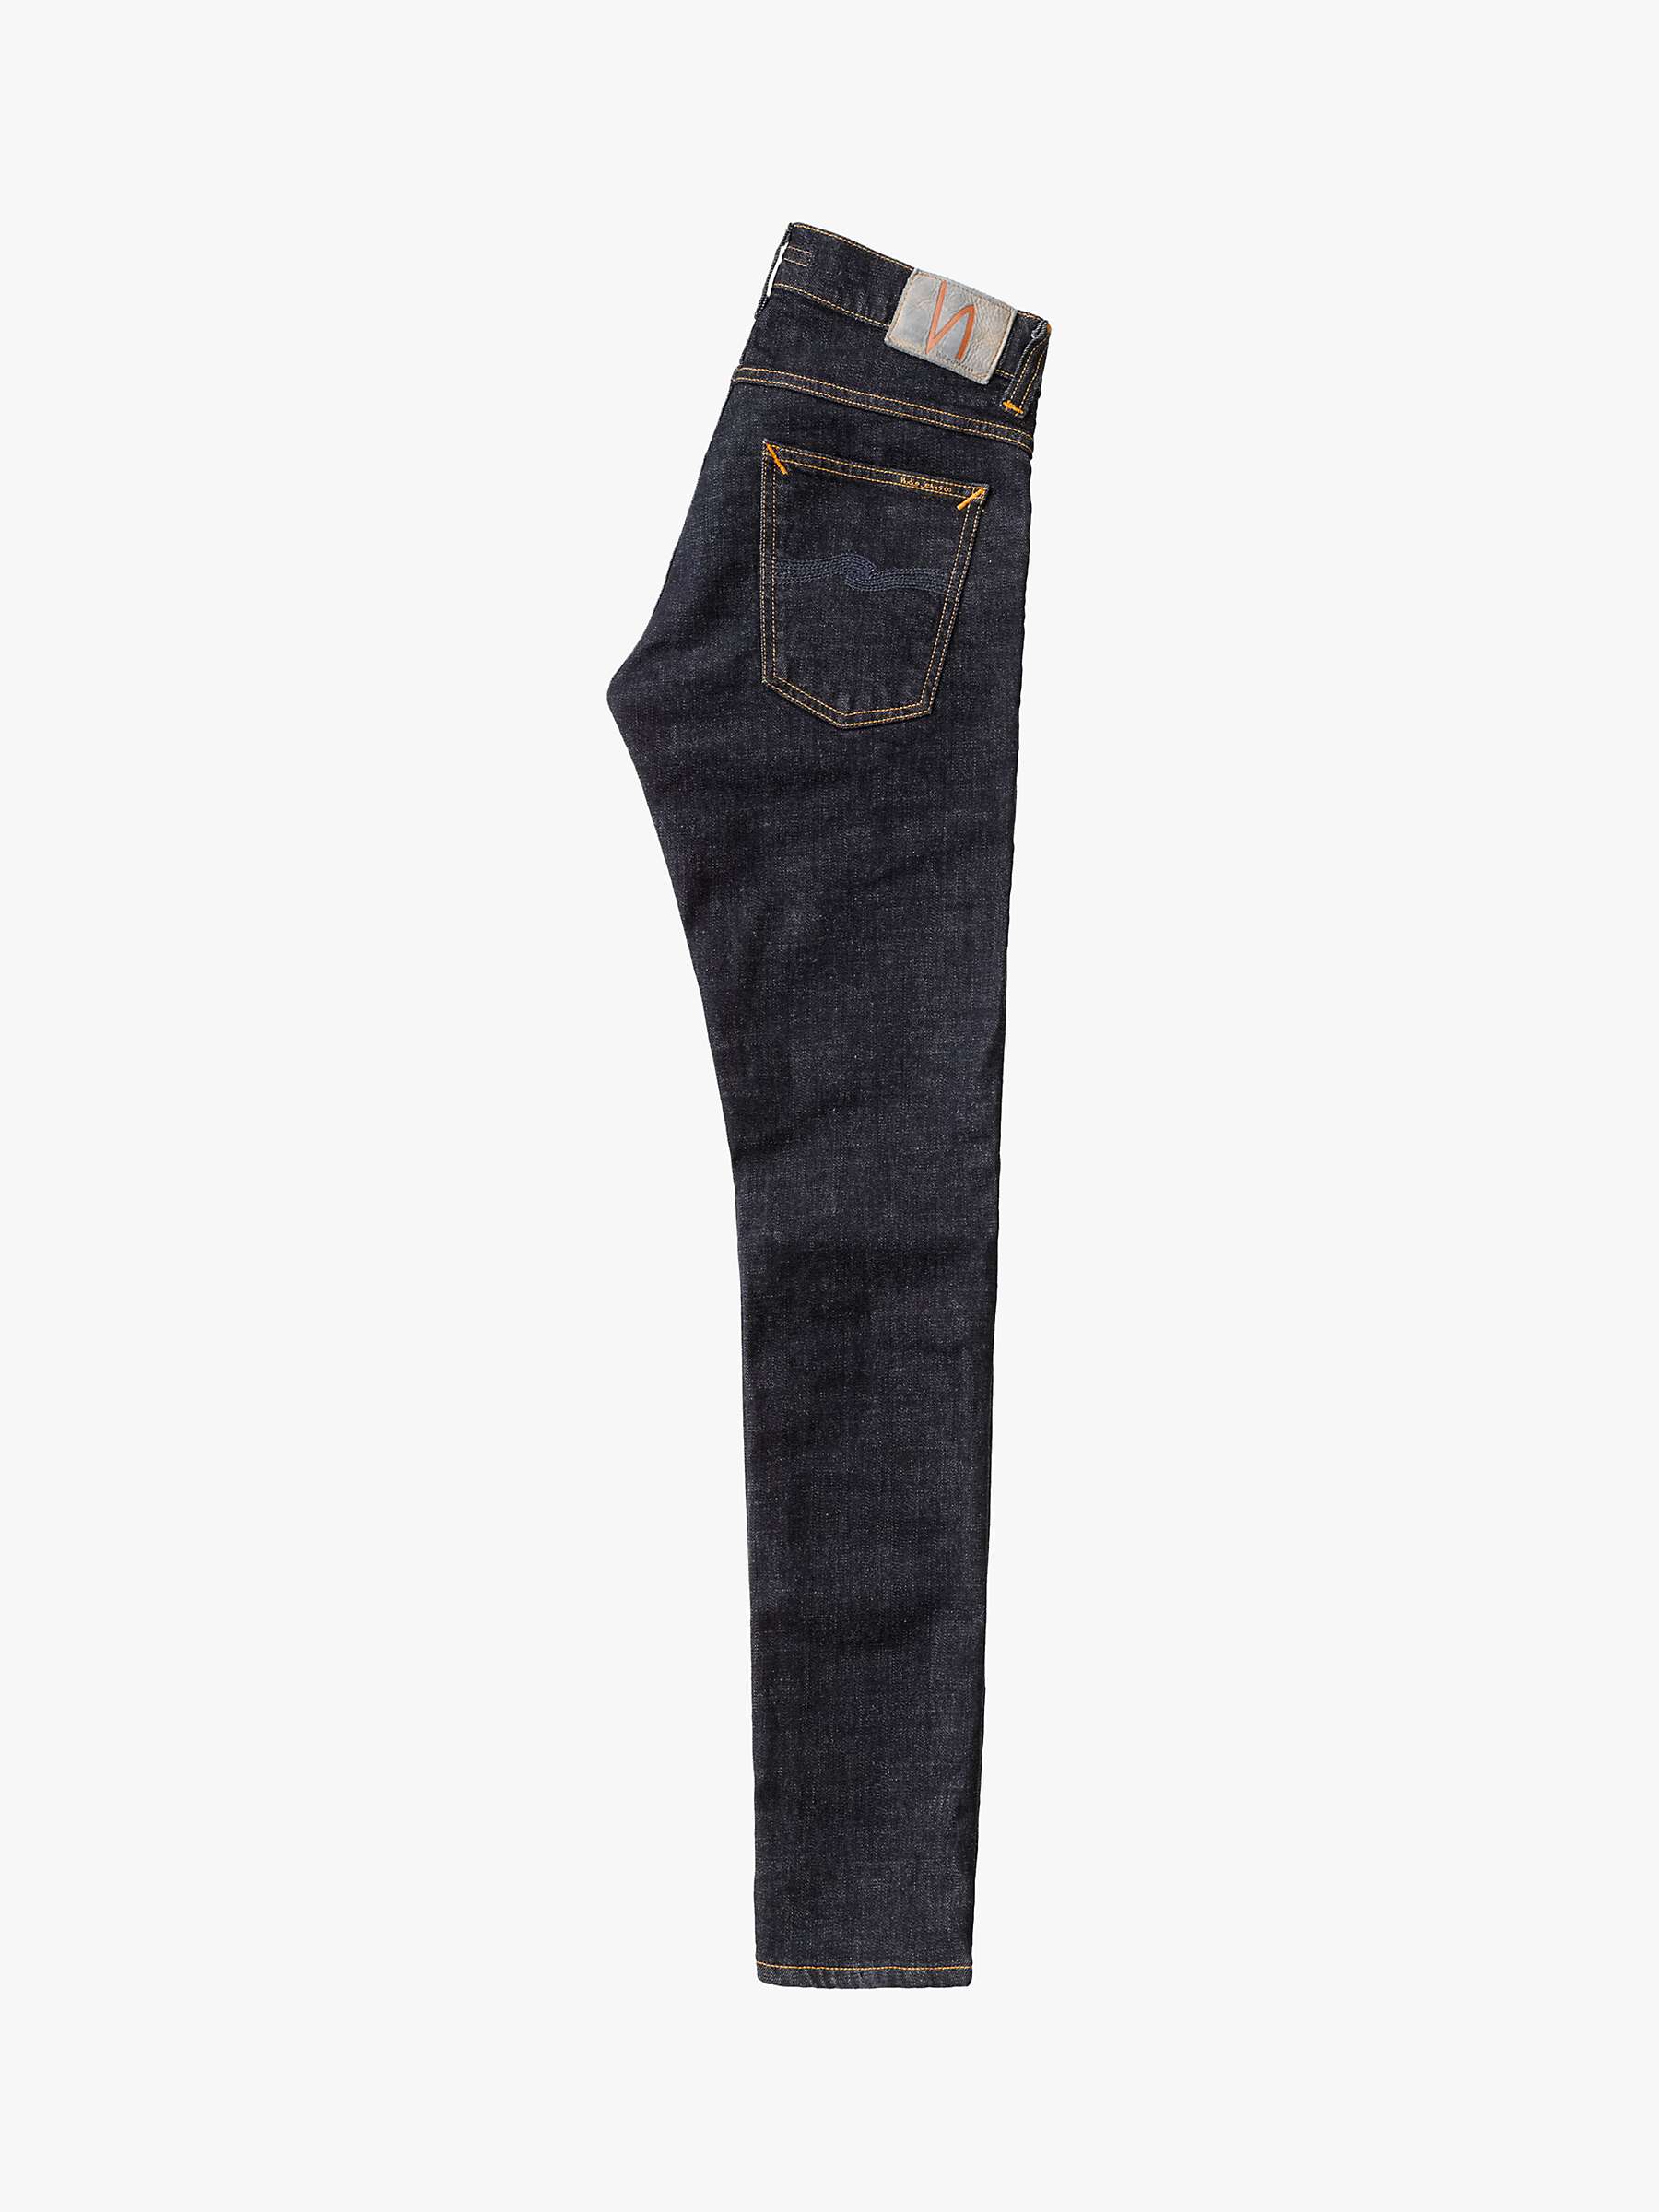 Buy Nudie Jeans Slim Tight Terry Jeans, Rinse Twill Online at johnlewis.com